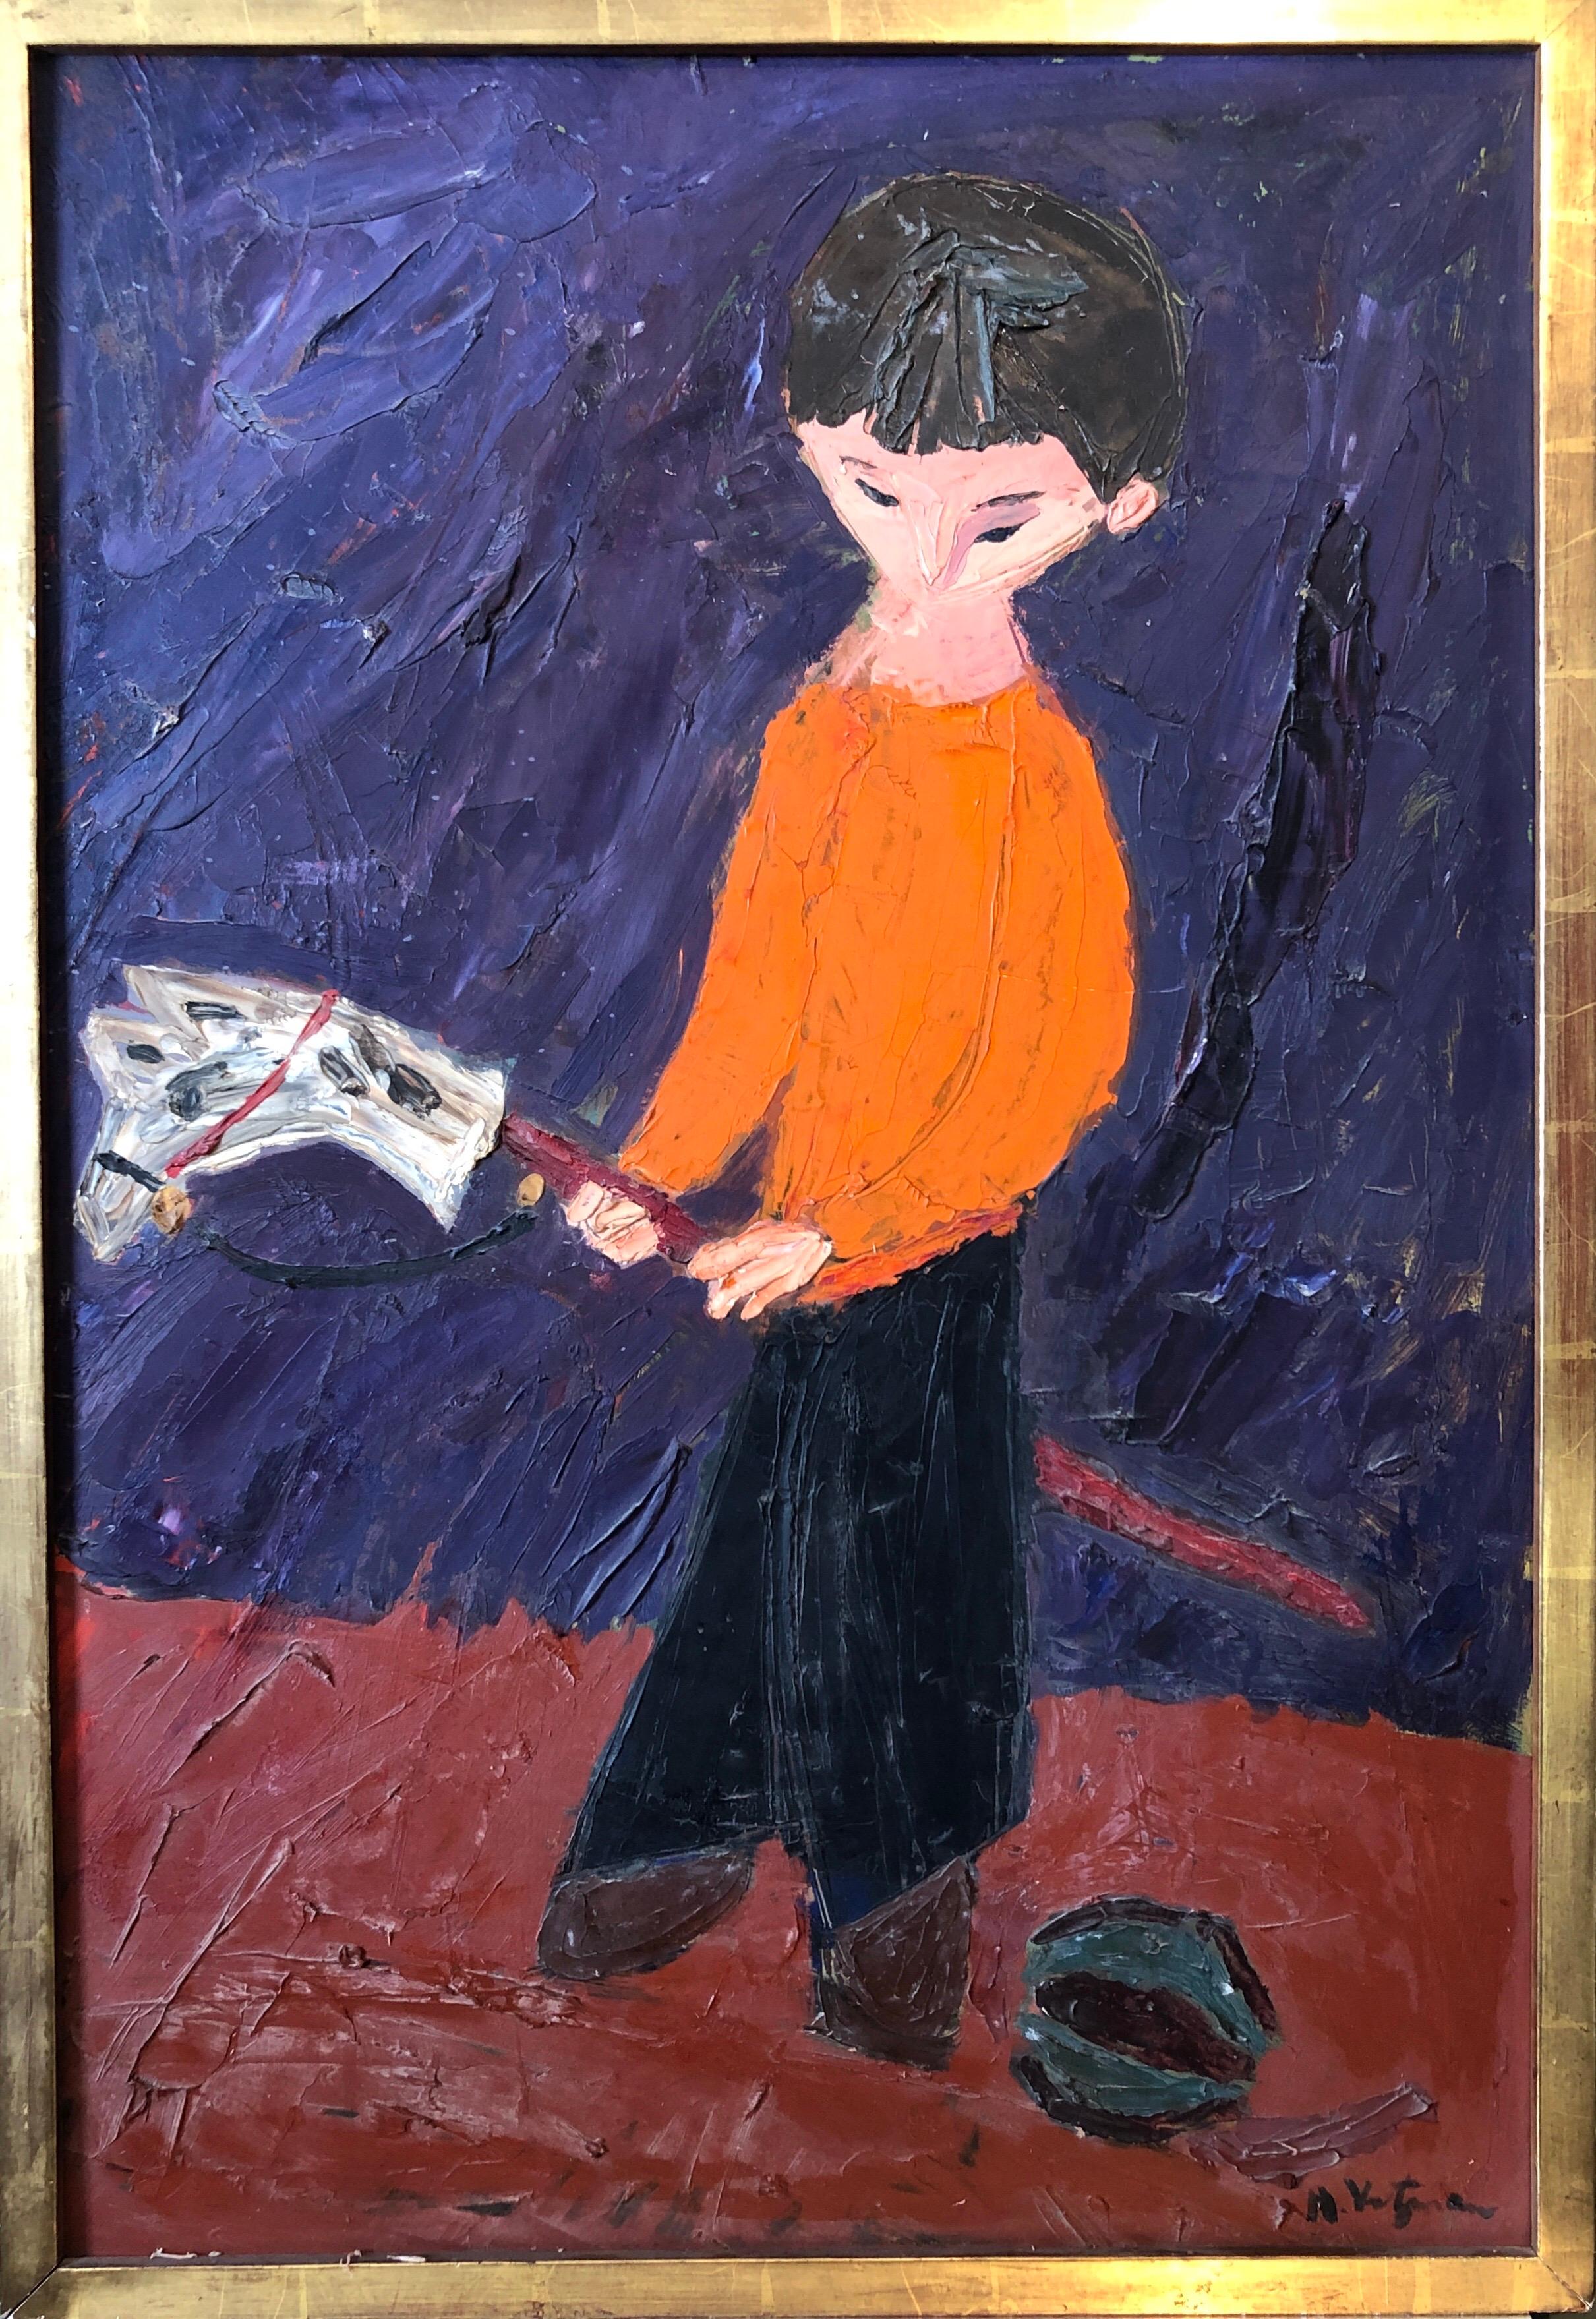 Herbert Katzman Figurative Painting - Boy Playing With Hobby Horse & Ball 1950's Expressionist Oil Painting Americana 